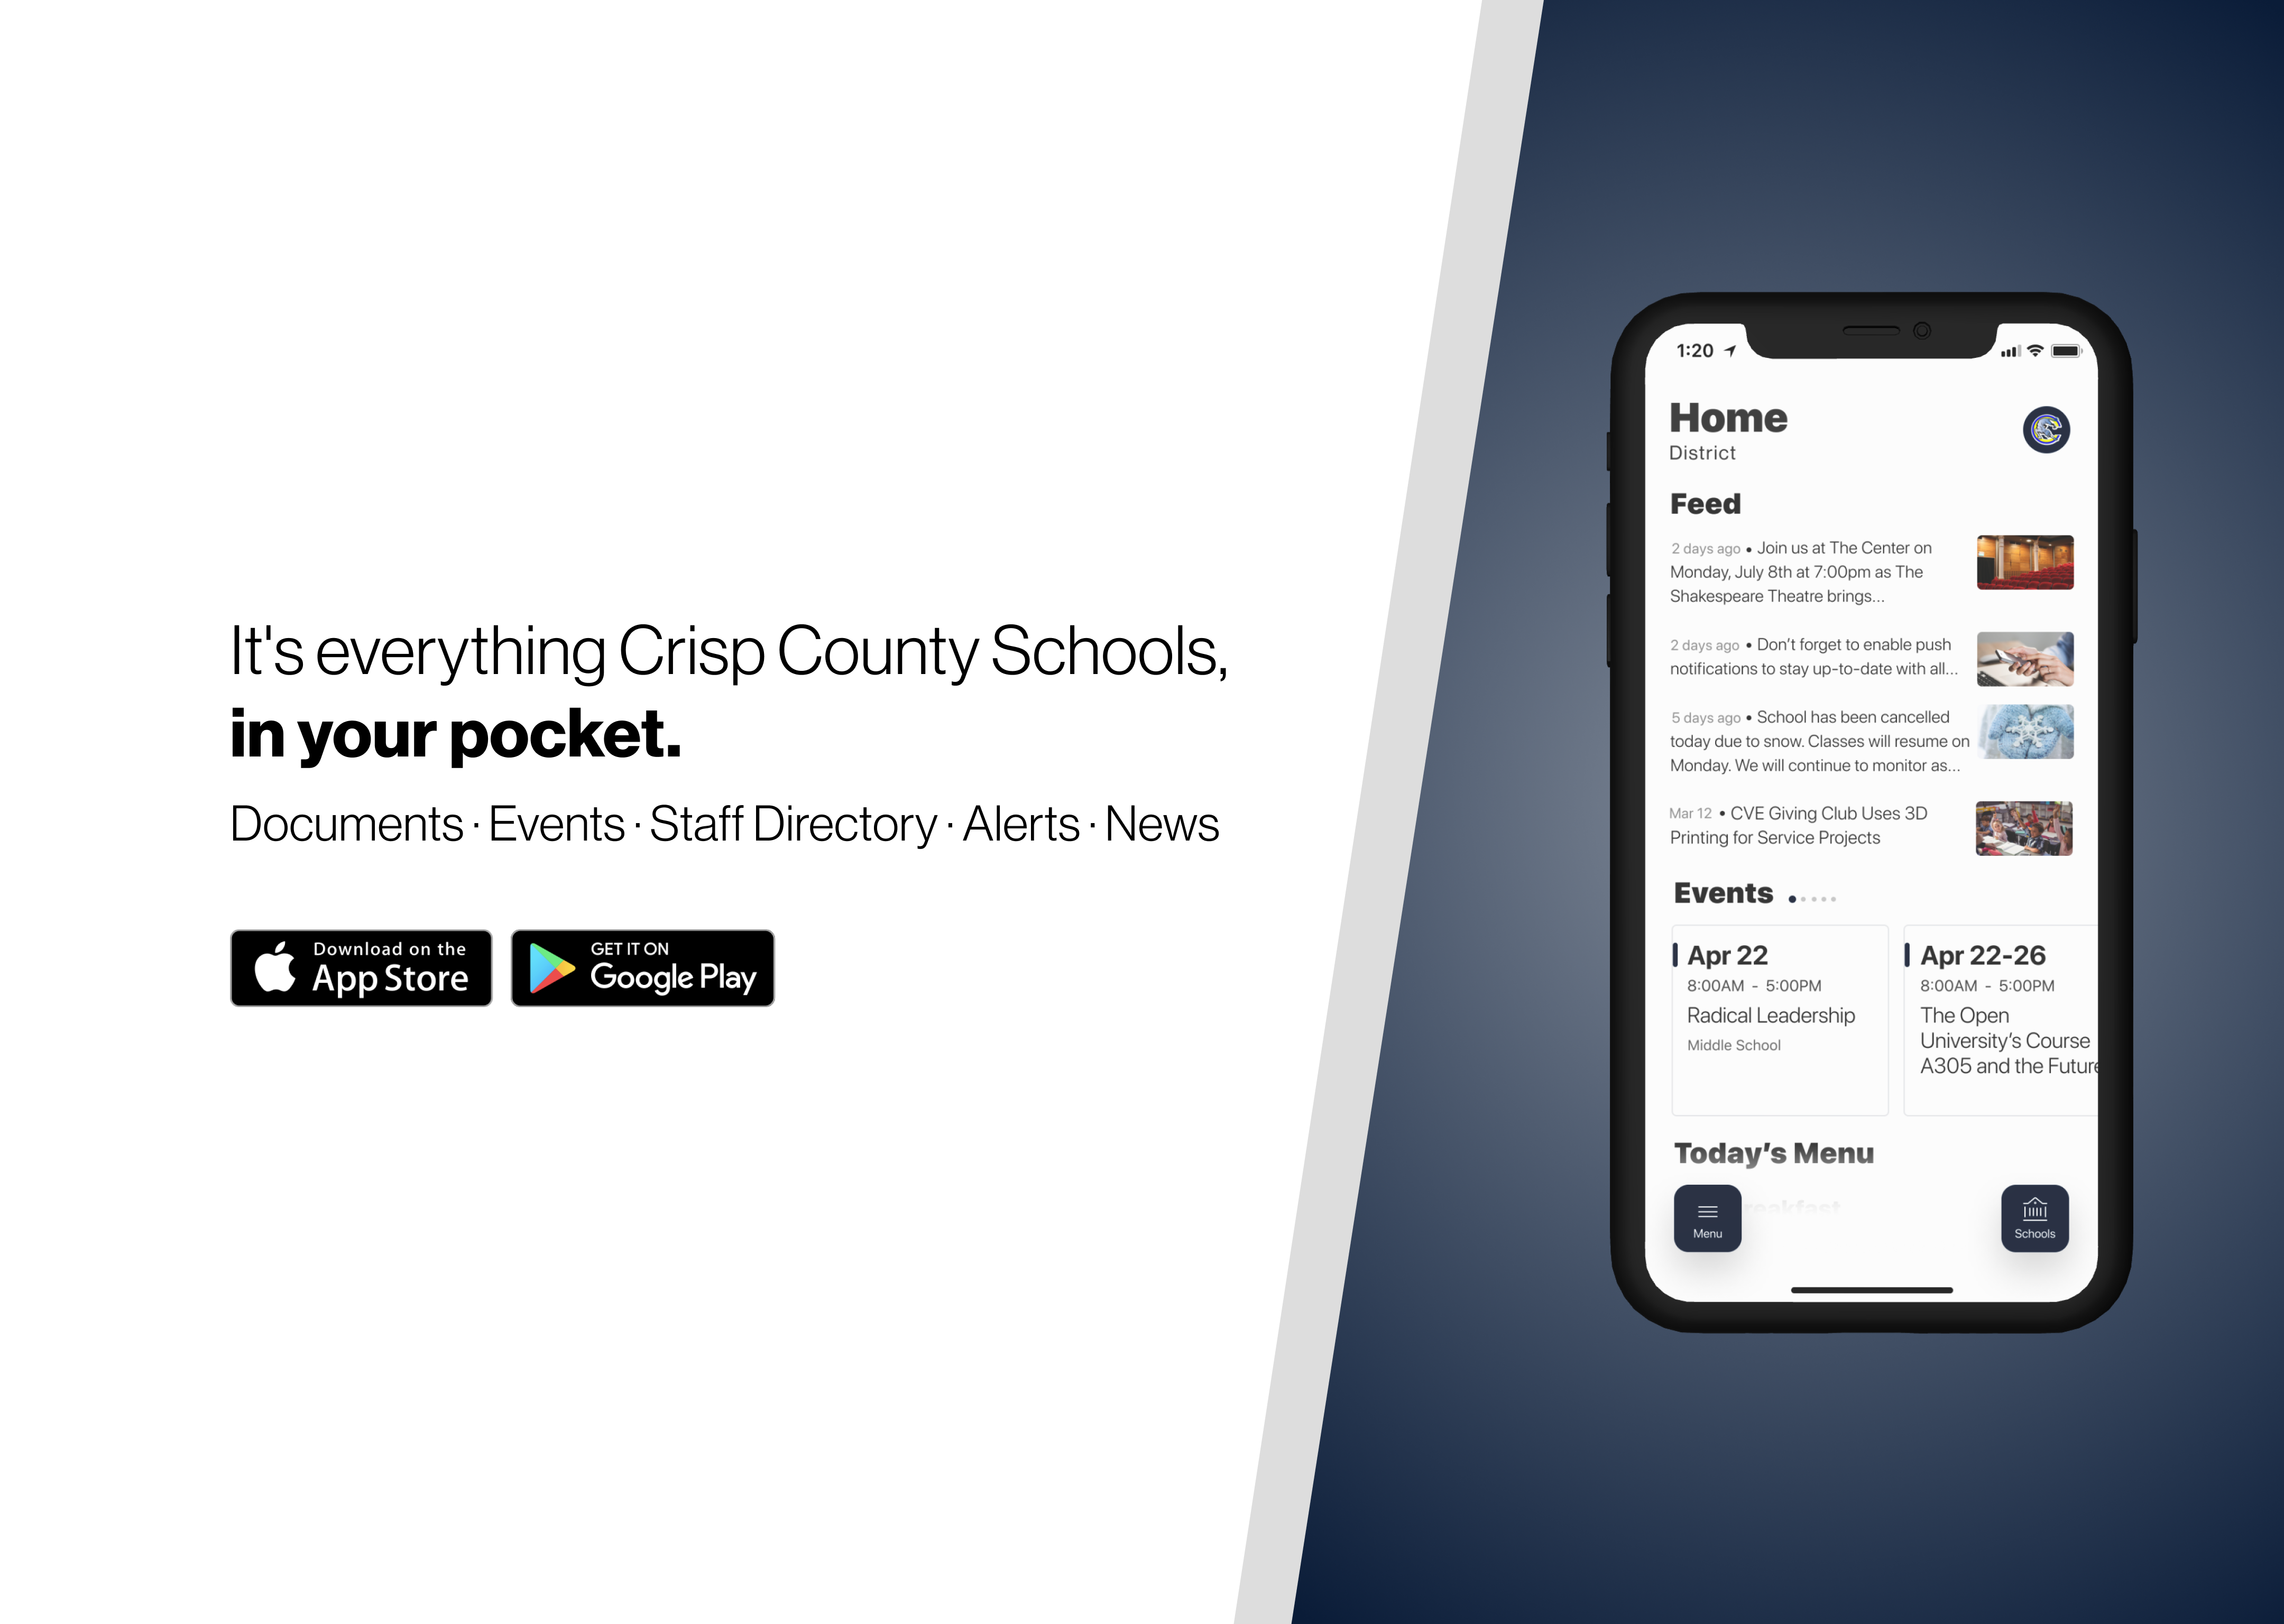 It's everything Crisp County Schools in your pocket.